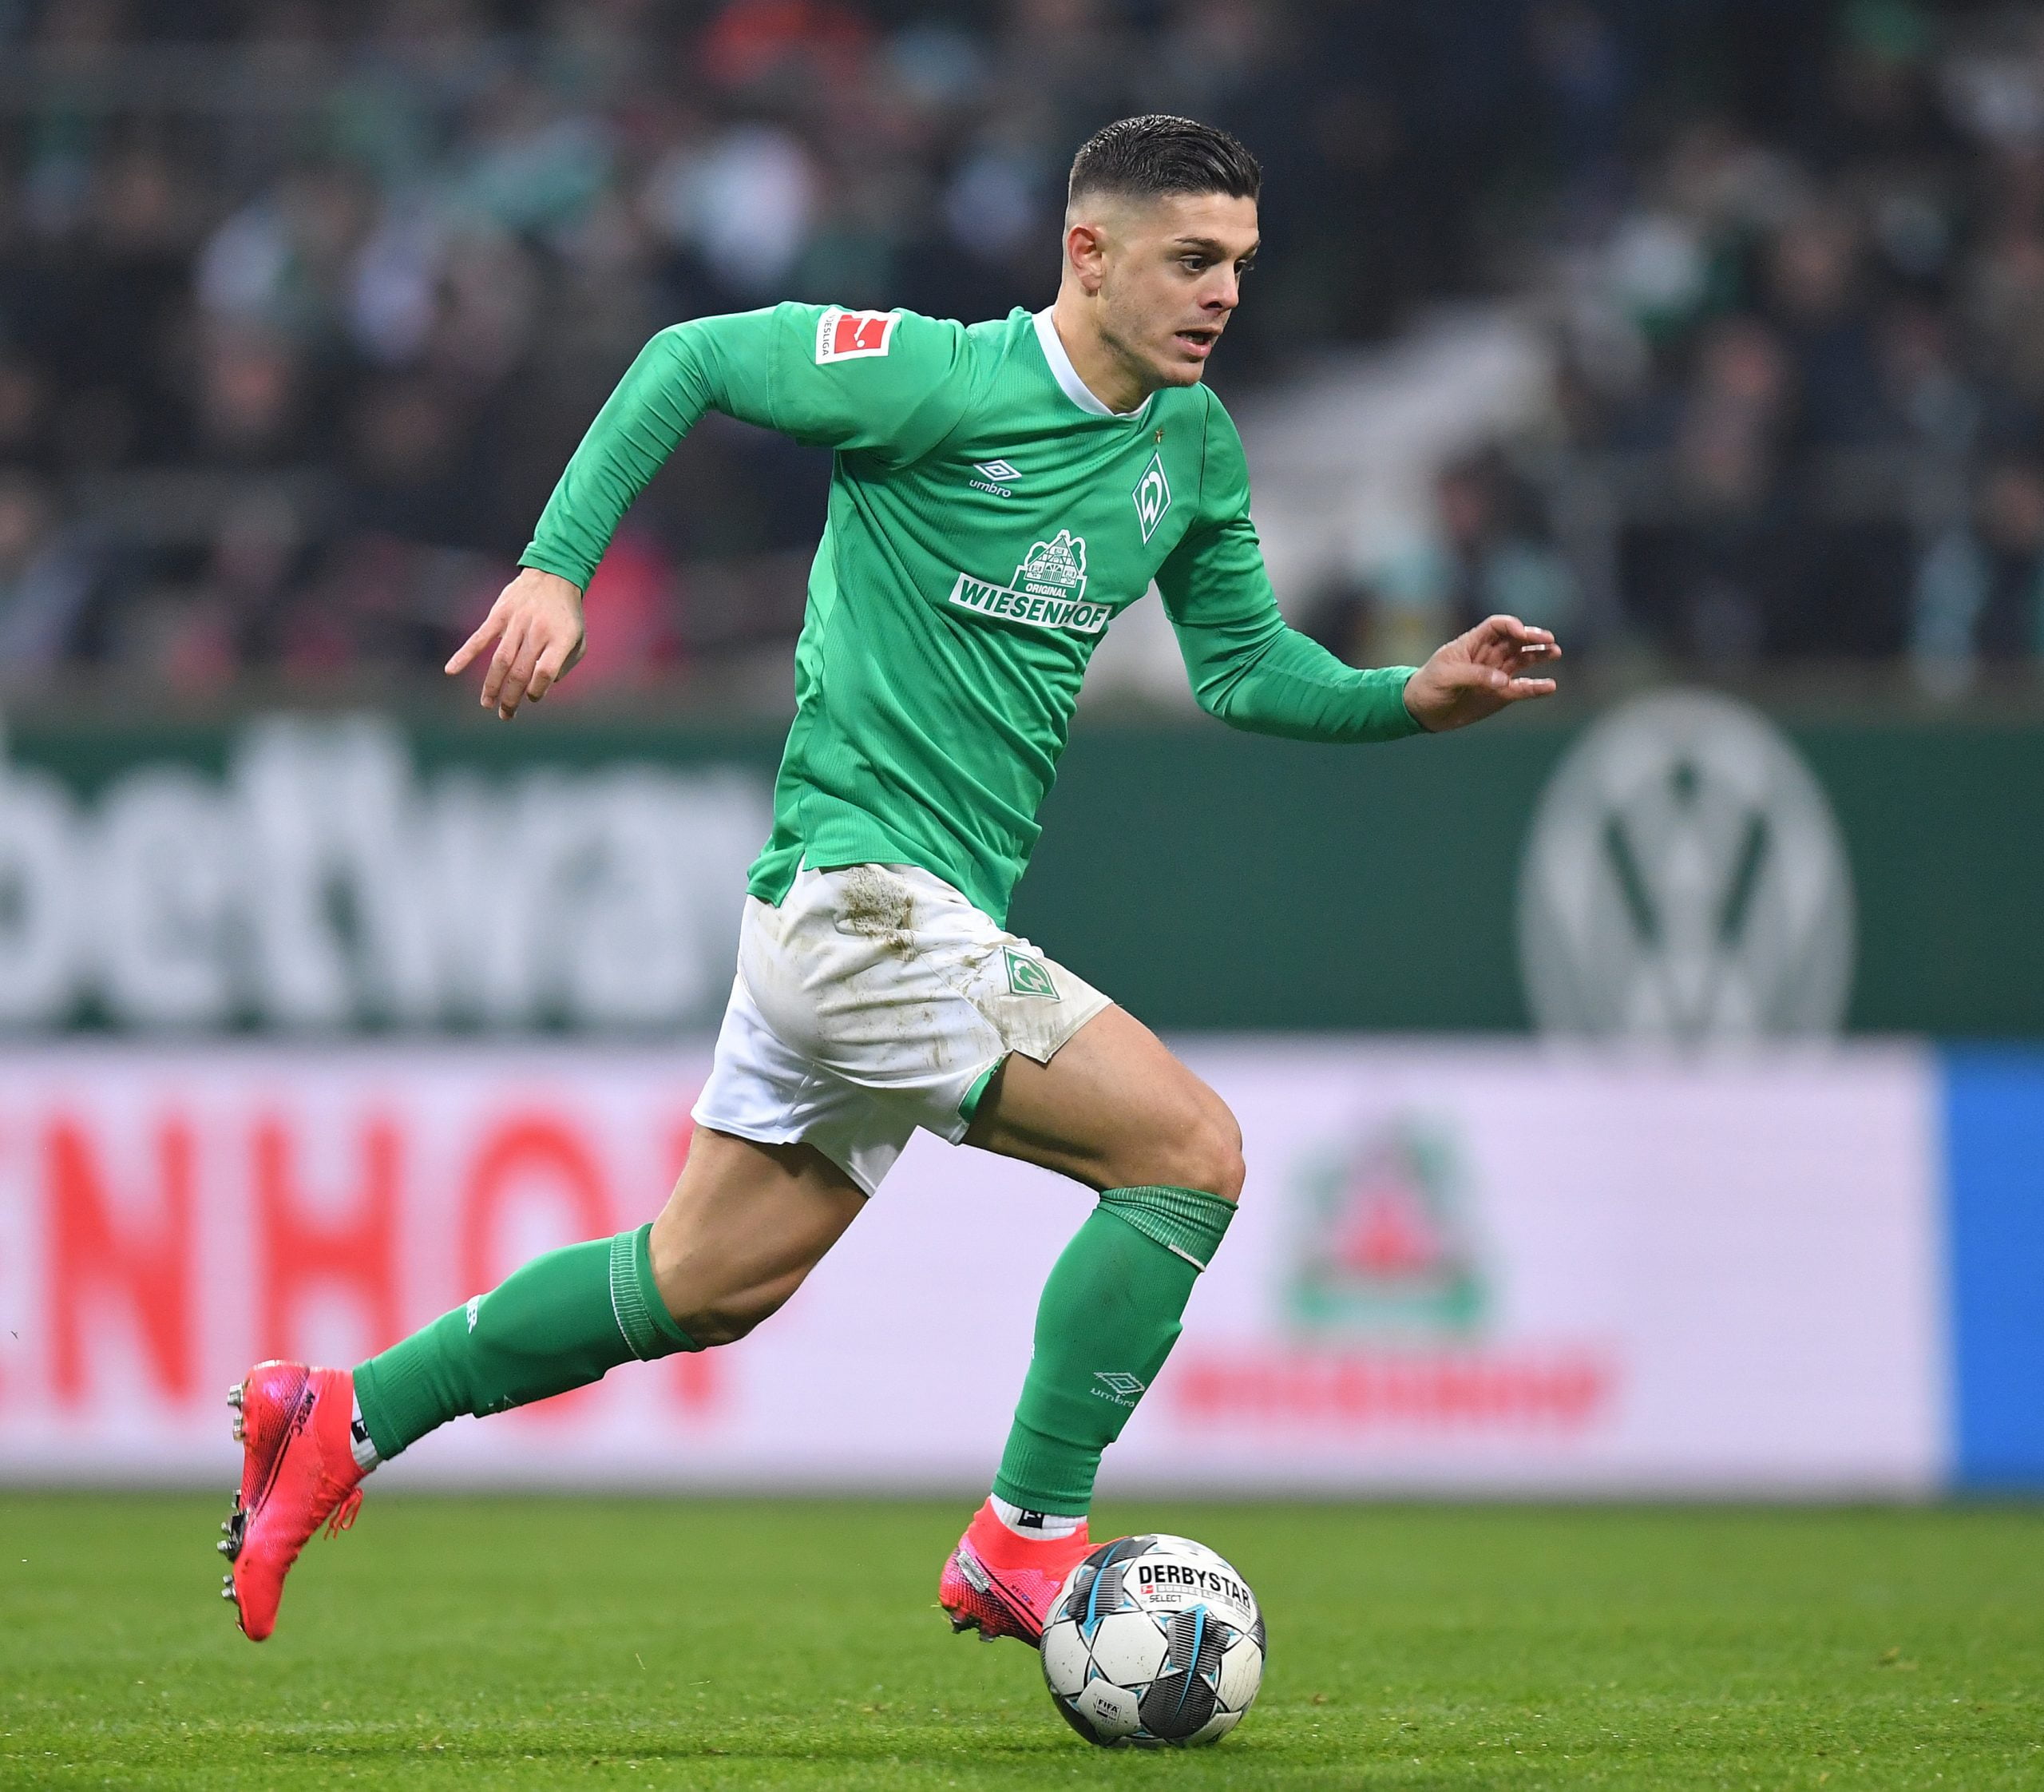 Aston Villa Interested In Milot Rashica - Rashica in action during a match